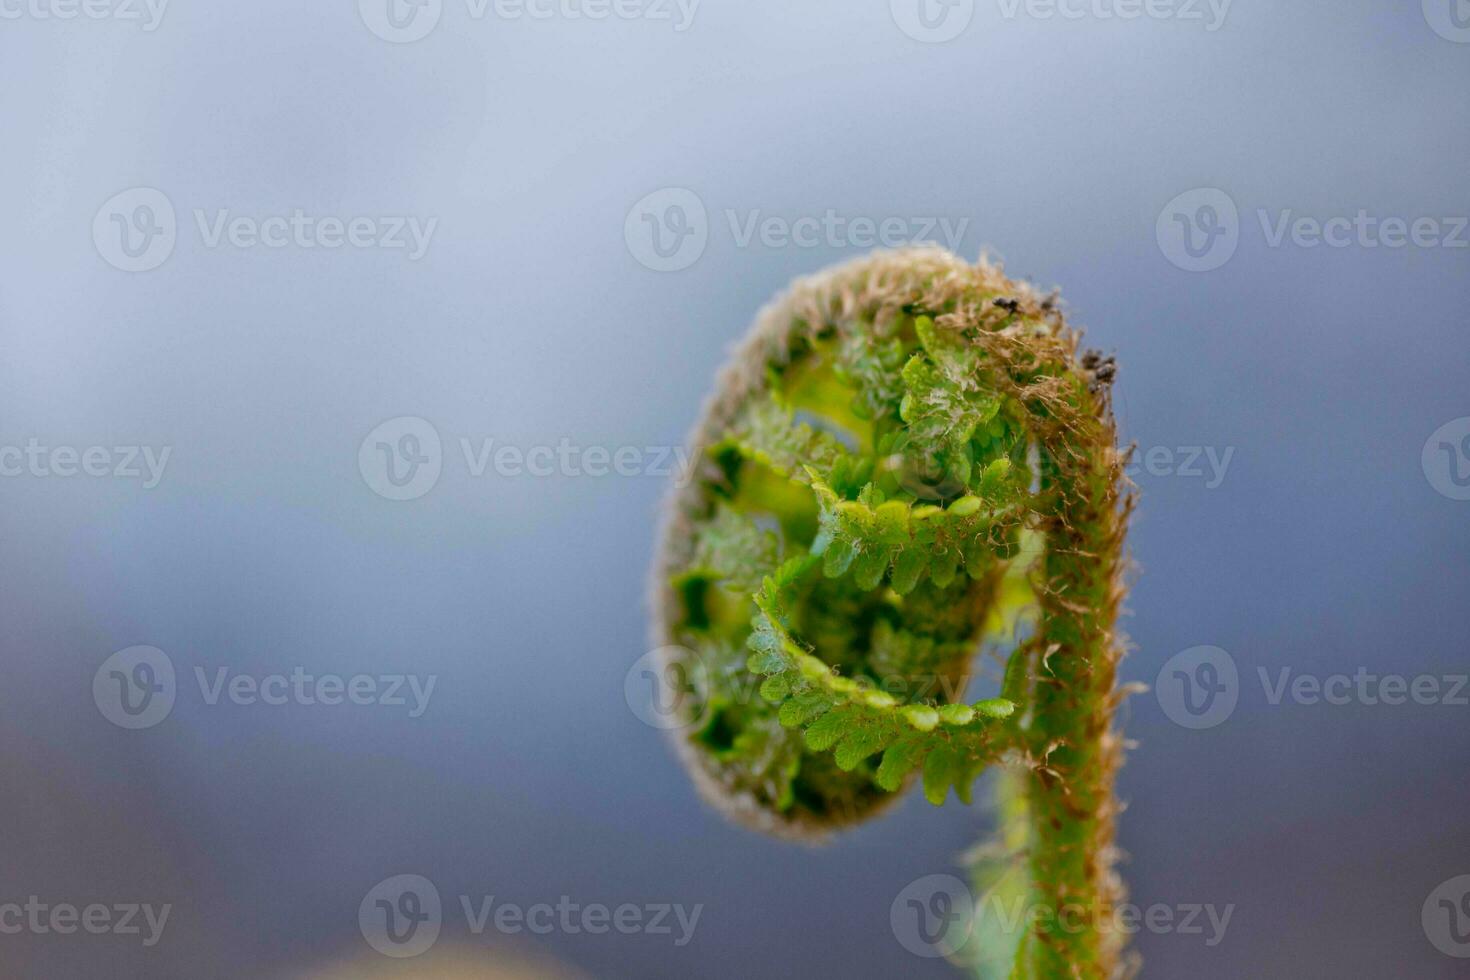 tree fern unrolling a new frond. Blossoming fern true leaves megaphylls close-up. Curl at the end of the fern leaf. photo